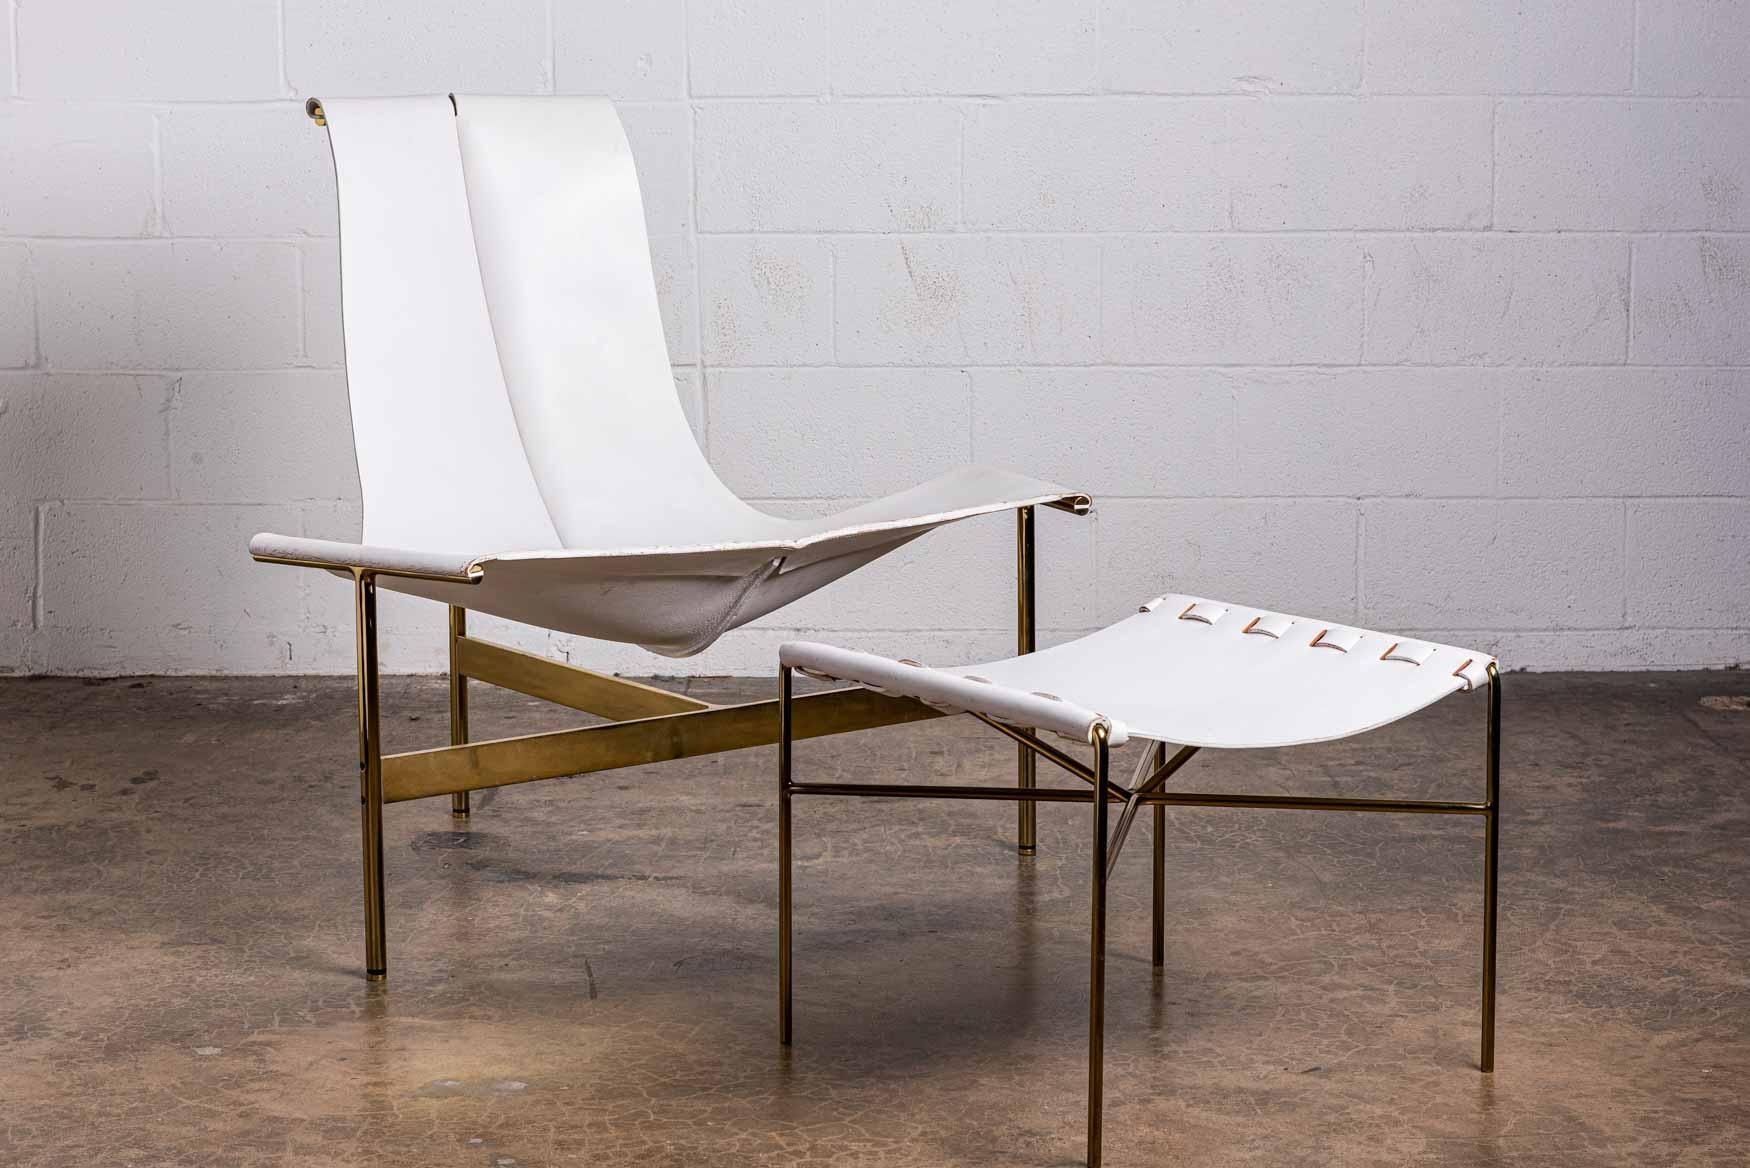 A t-chair and ottoman with brass frame and white leather. 

Chair: 40.75 W x 31.5 D x 36.5 H / 18.75 SH
Ottoman: 20.5 x 20 x 16.75 H.